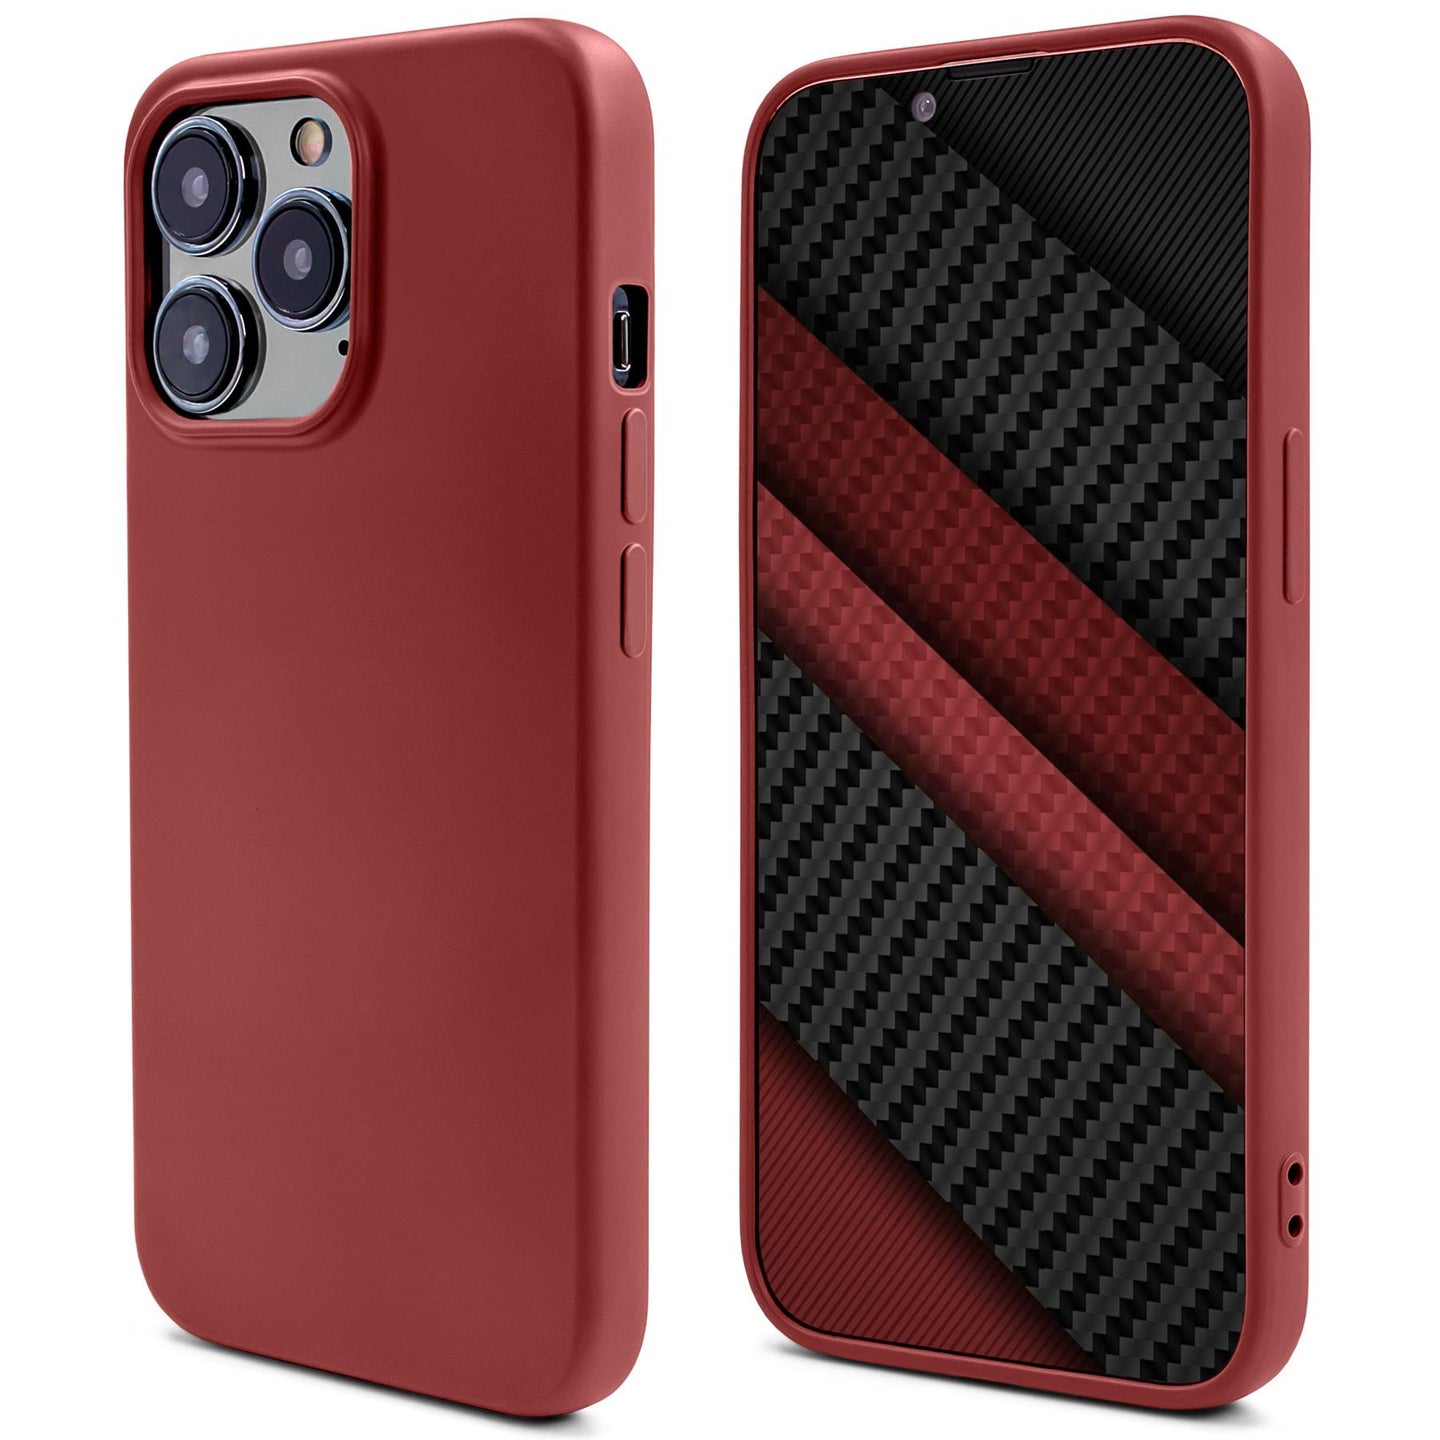 Moozy Lifestyle. Silicone Case for iPhone 14 Pro, Vintage Pink - Liquid Silicone Lightweight Cover with Matte Finish and Soft Microfiber Lining, Premium Silicone Case